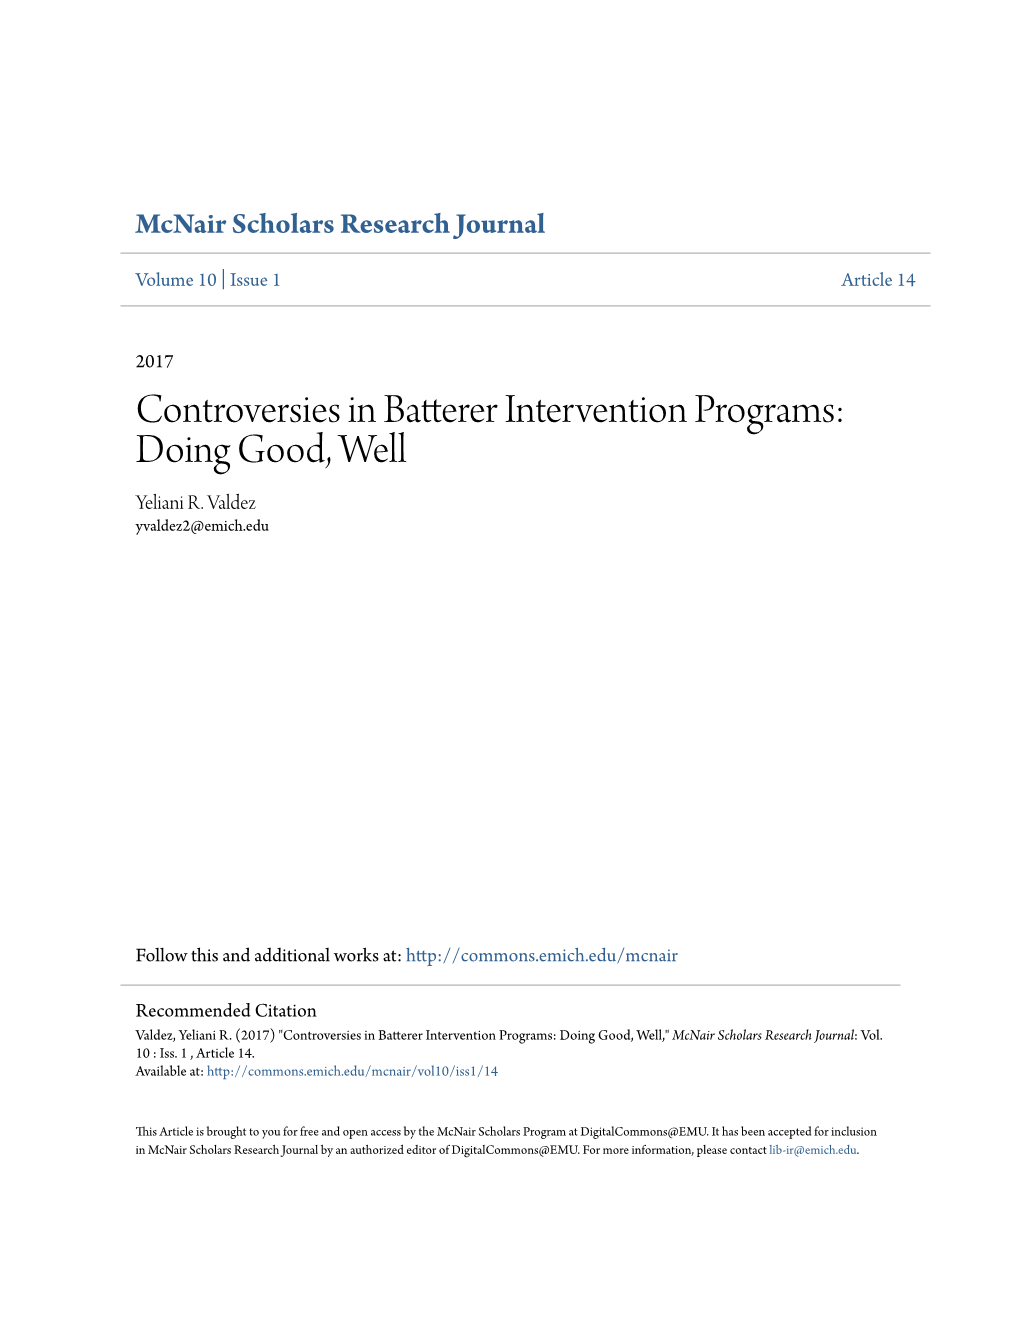 Controversies in Batterer Intervention Programs: Doing Good, Well Yeliani R